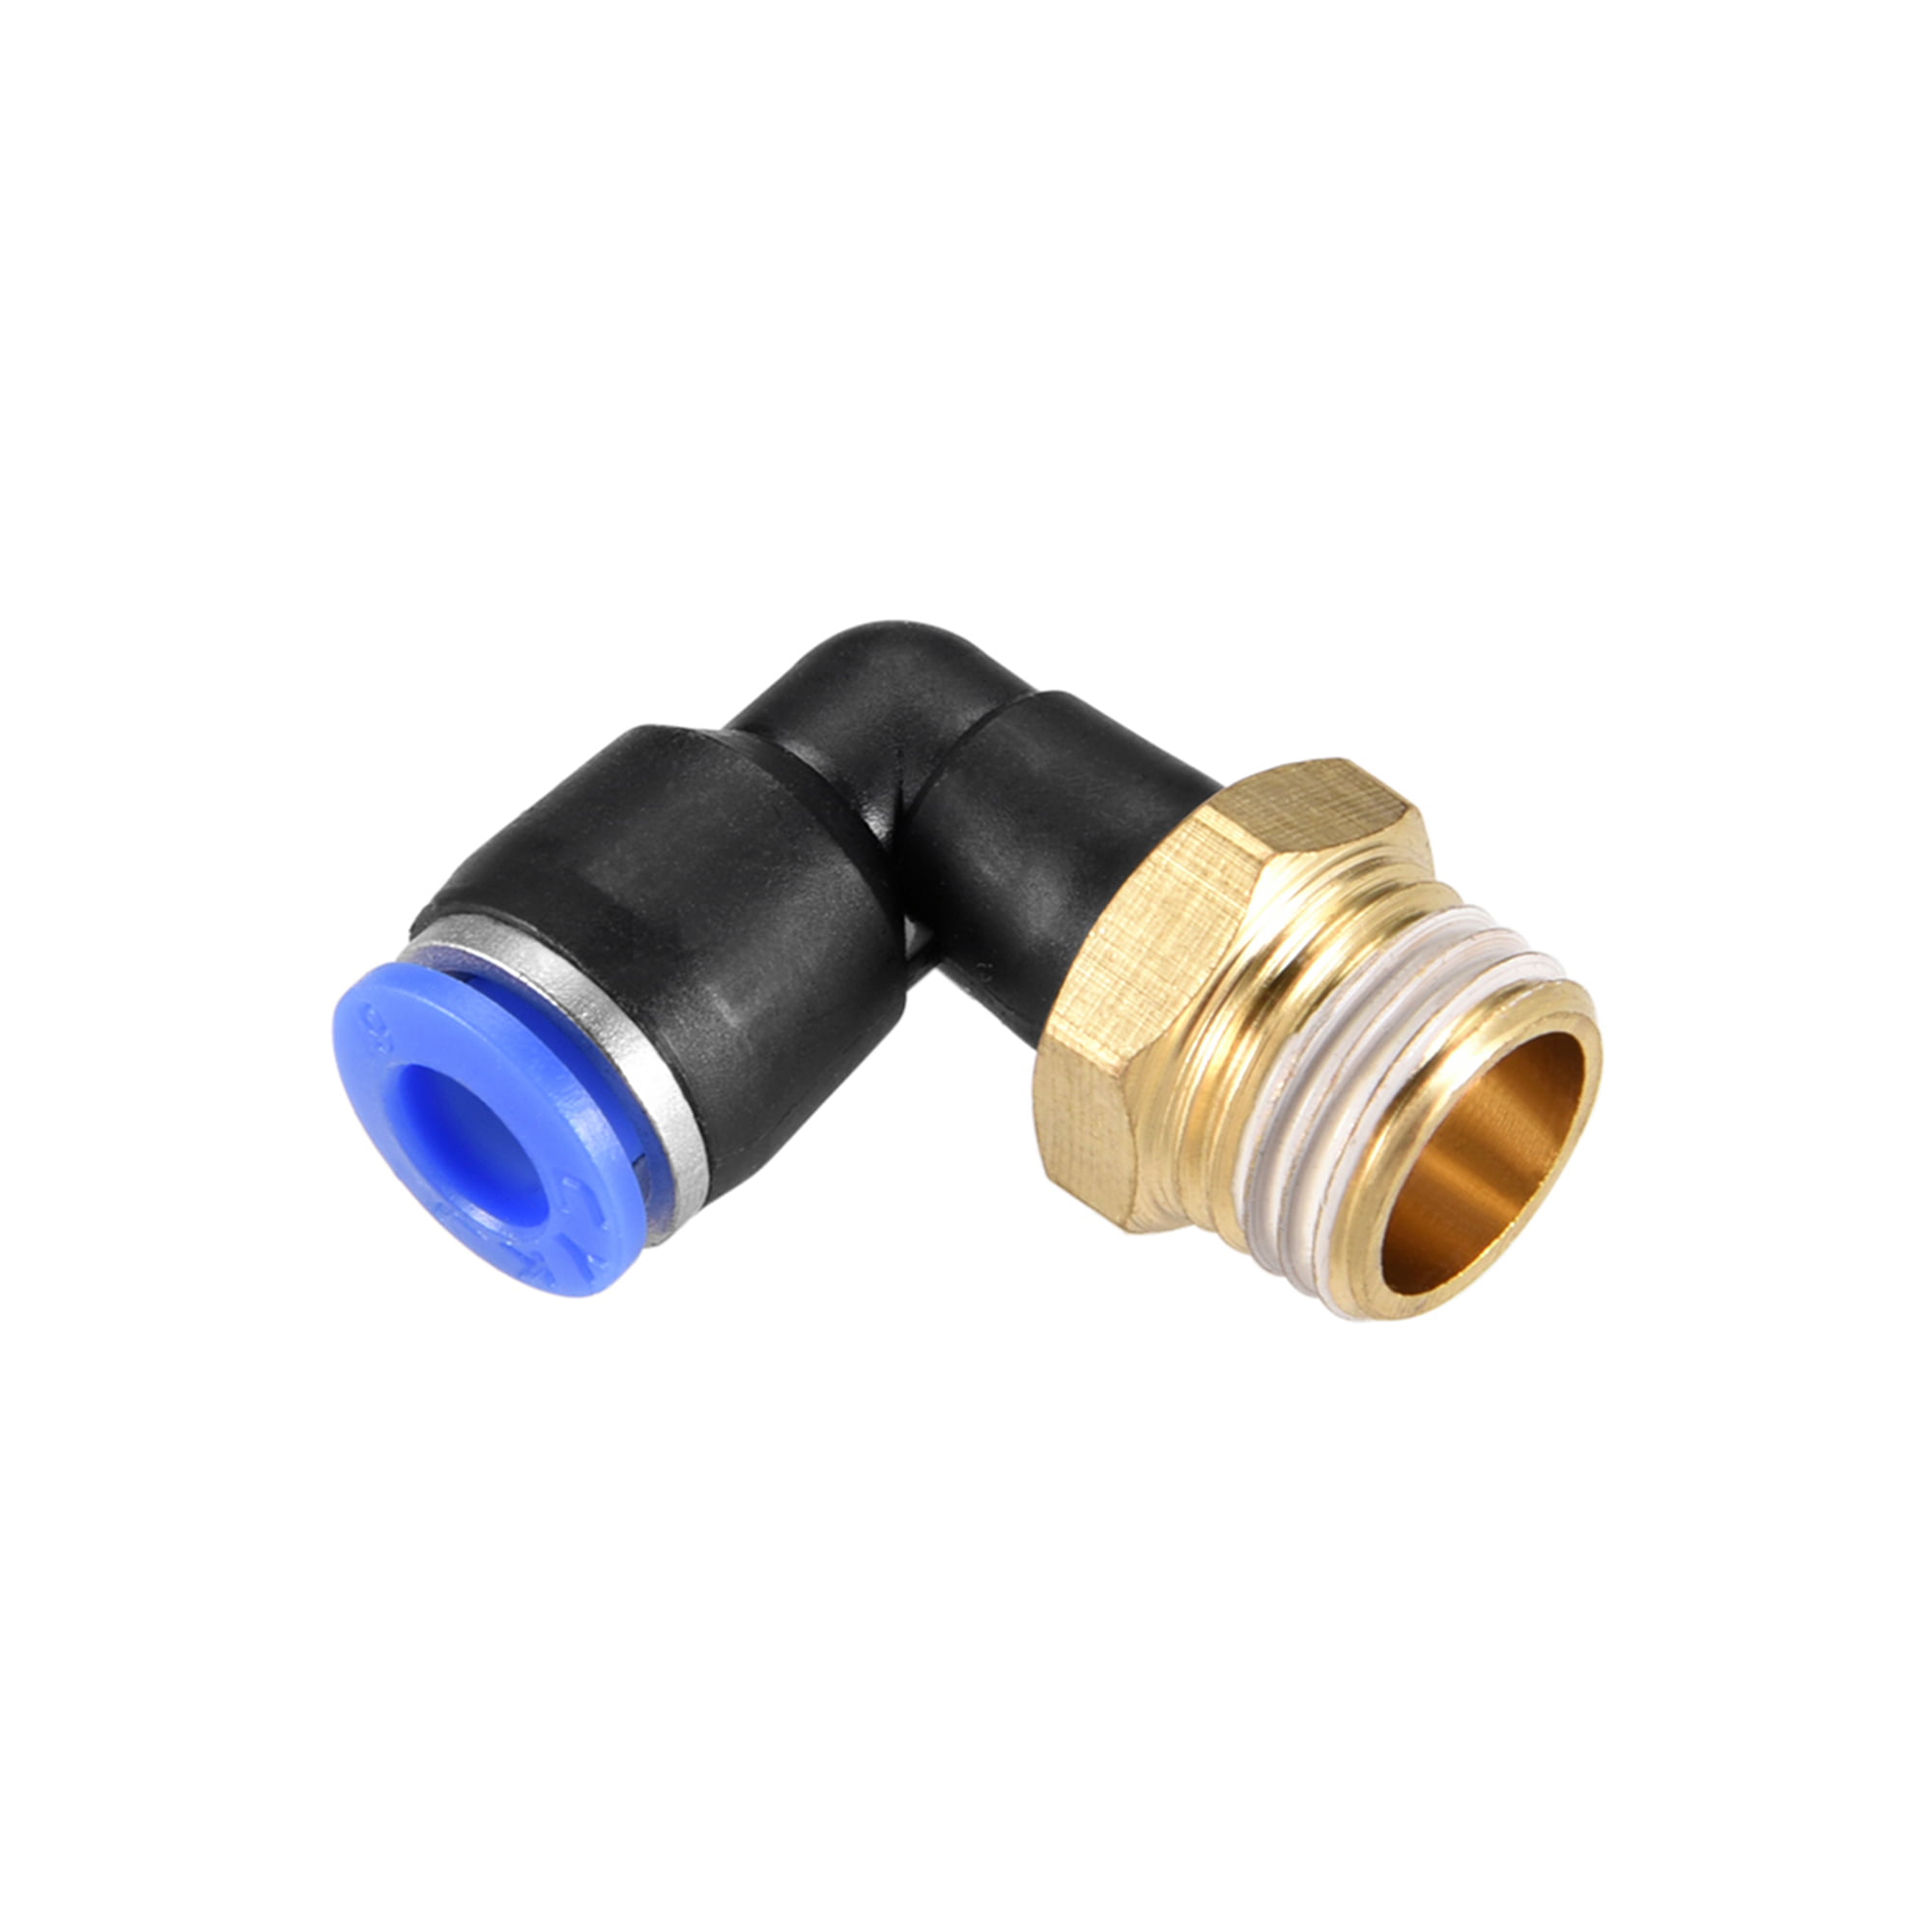 yan 4 Piece Pneumatic Air Quick Push to Connect Fitting 1/4 OD T Tee Tube 6mm